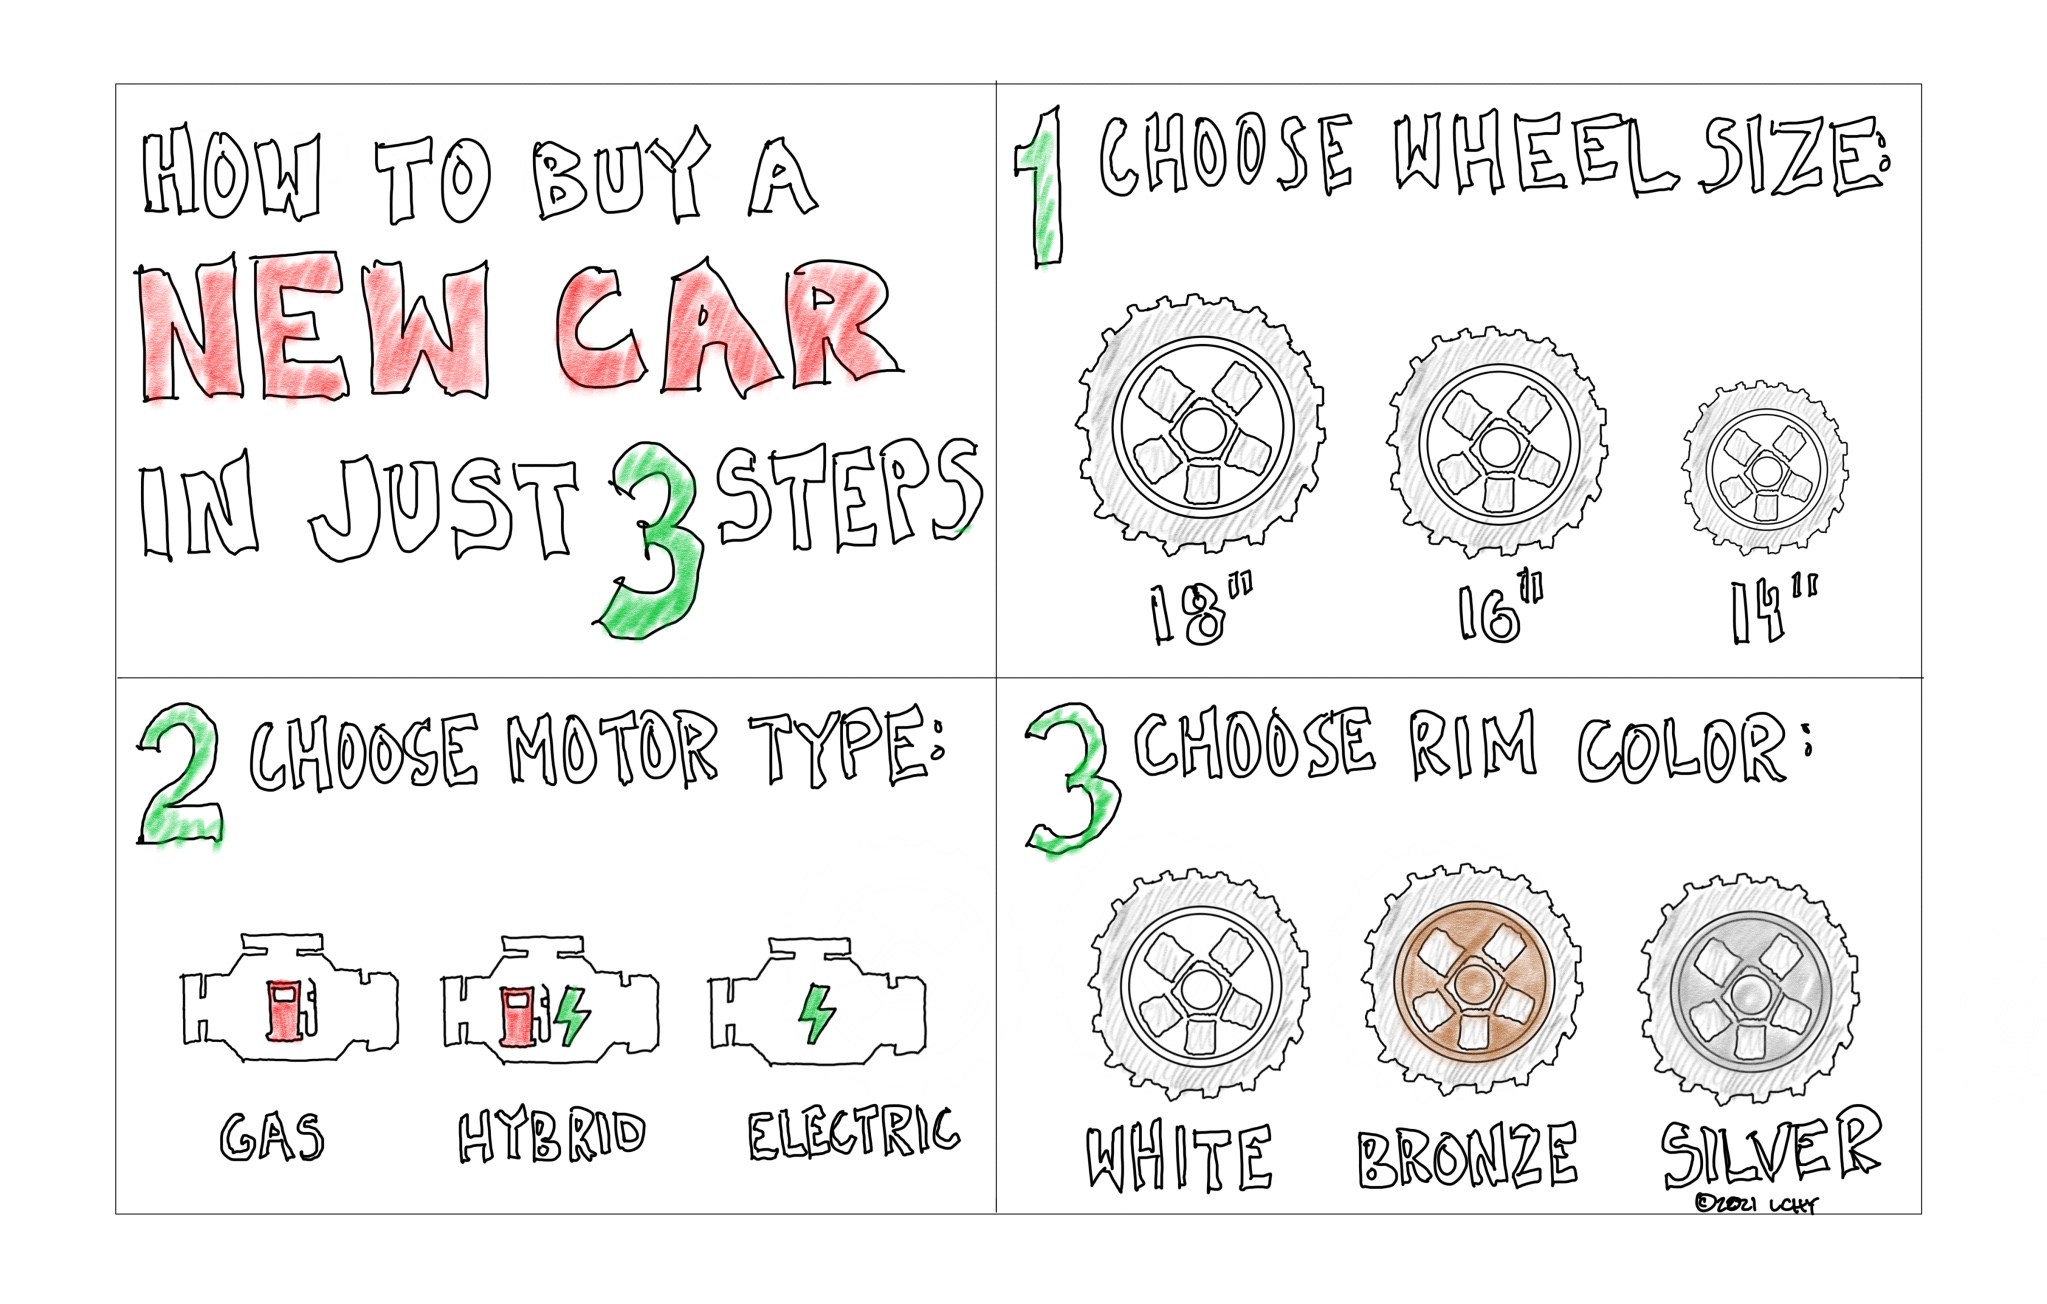 How to Buy a New Car in Just 3 Steps 1. Choose Wheel Size: 18 inches, 16 inches, 14 inches 2. Choose Motor Type: gas, hybrid, electric 3. Choose Rim Color: White, Bronze, Silver